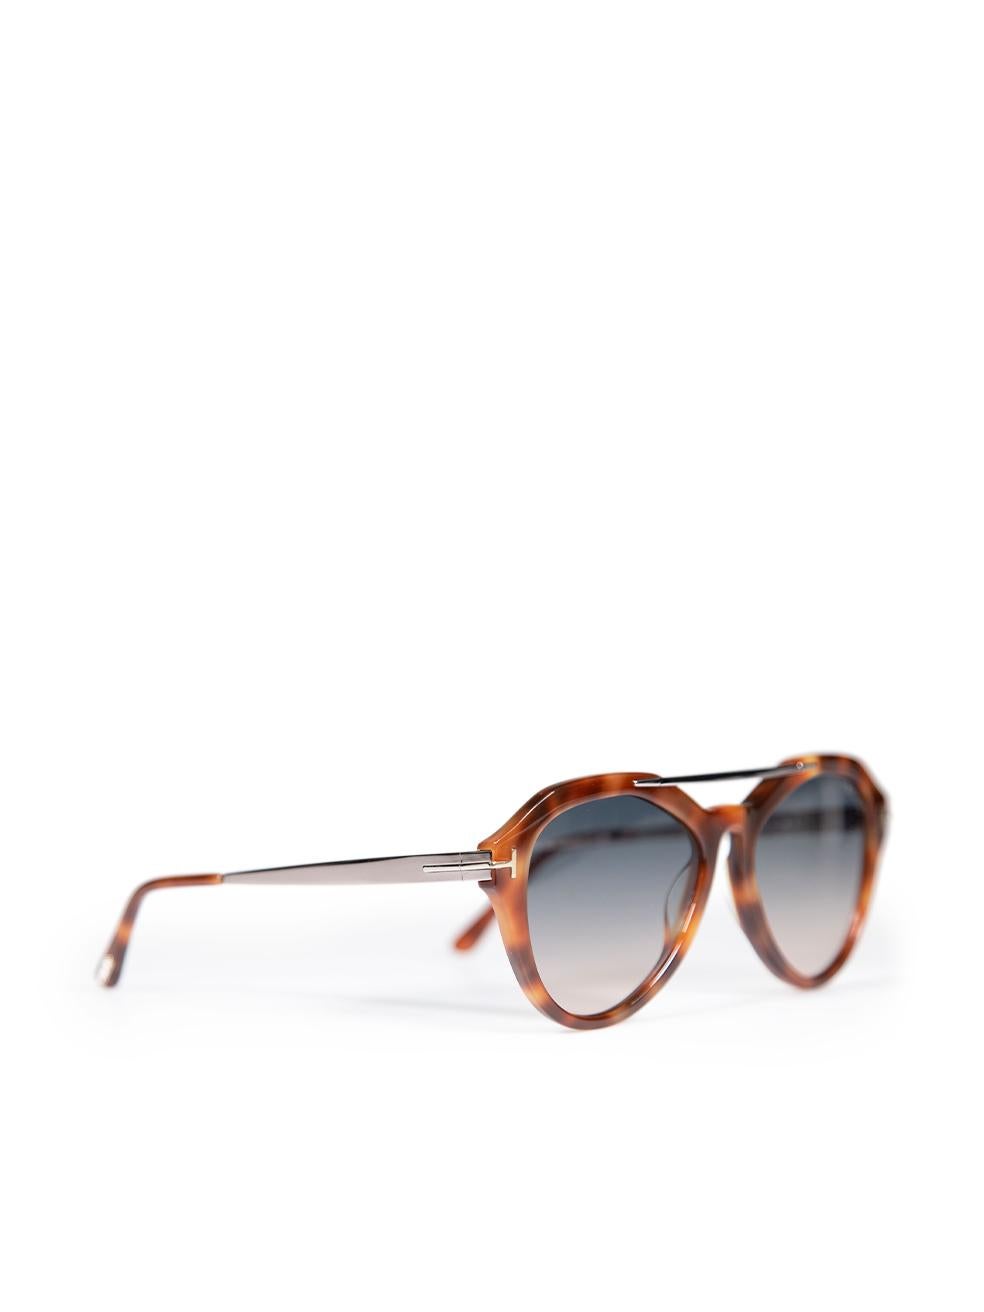 Tom Ford Blonde Havana Lisa Aviator Sunglasses In New Condition For Sale In London, GB